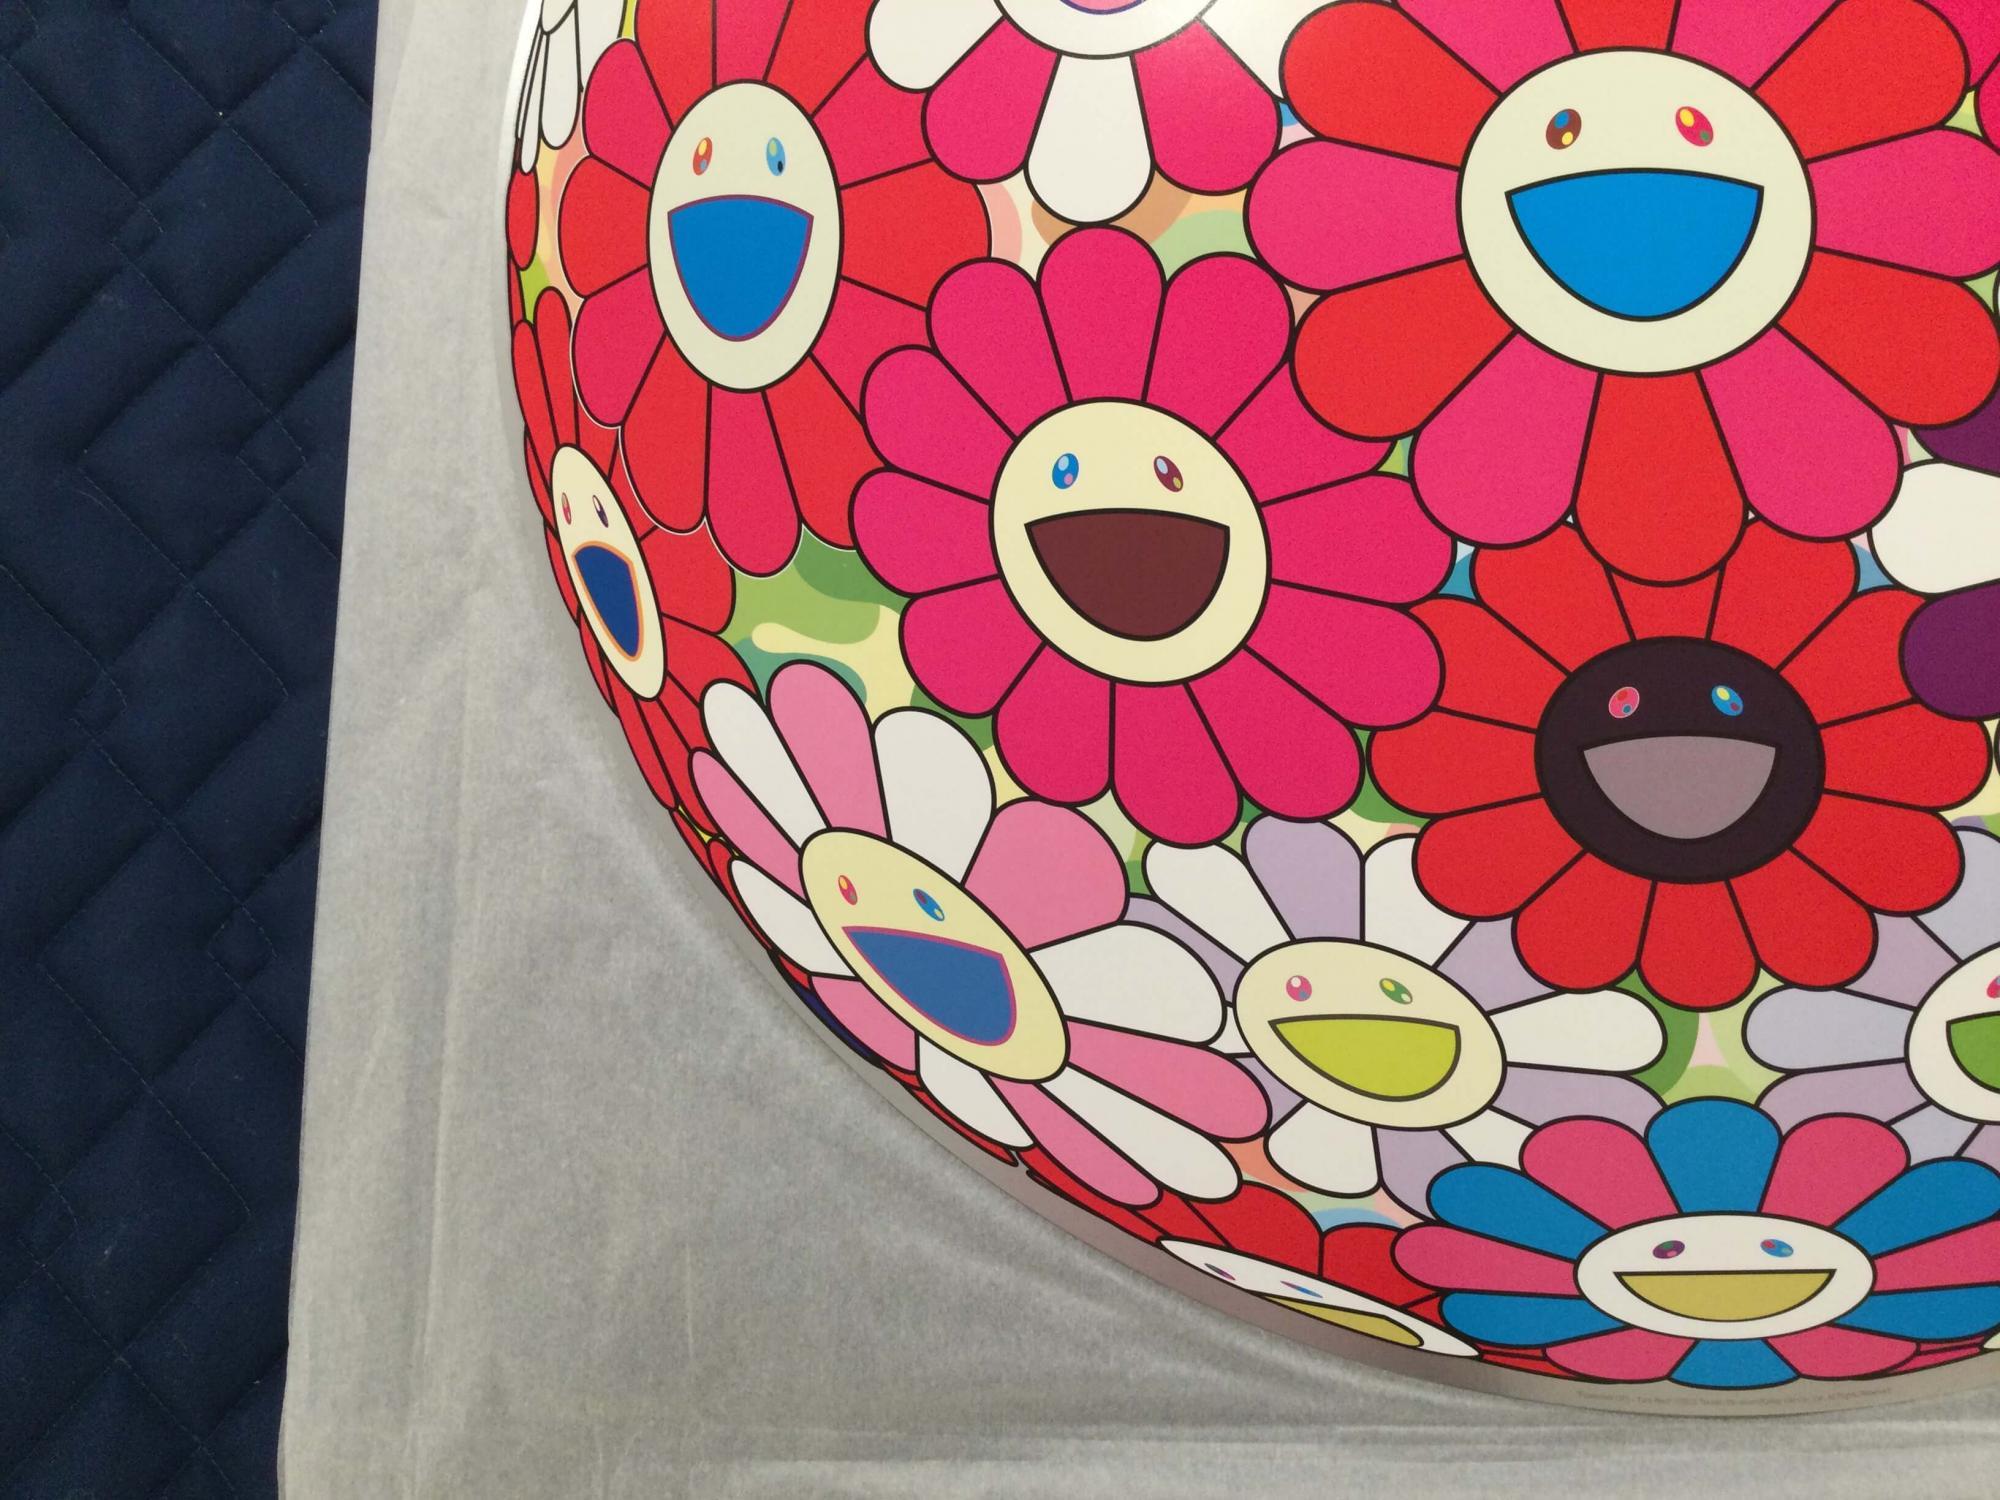 Flowerball (3D) - Turn Red! Limited Edition (print) Murakami signed and numbered For Sale 1